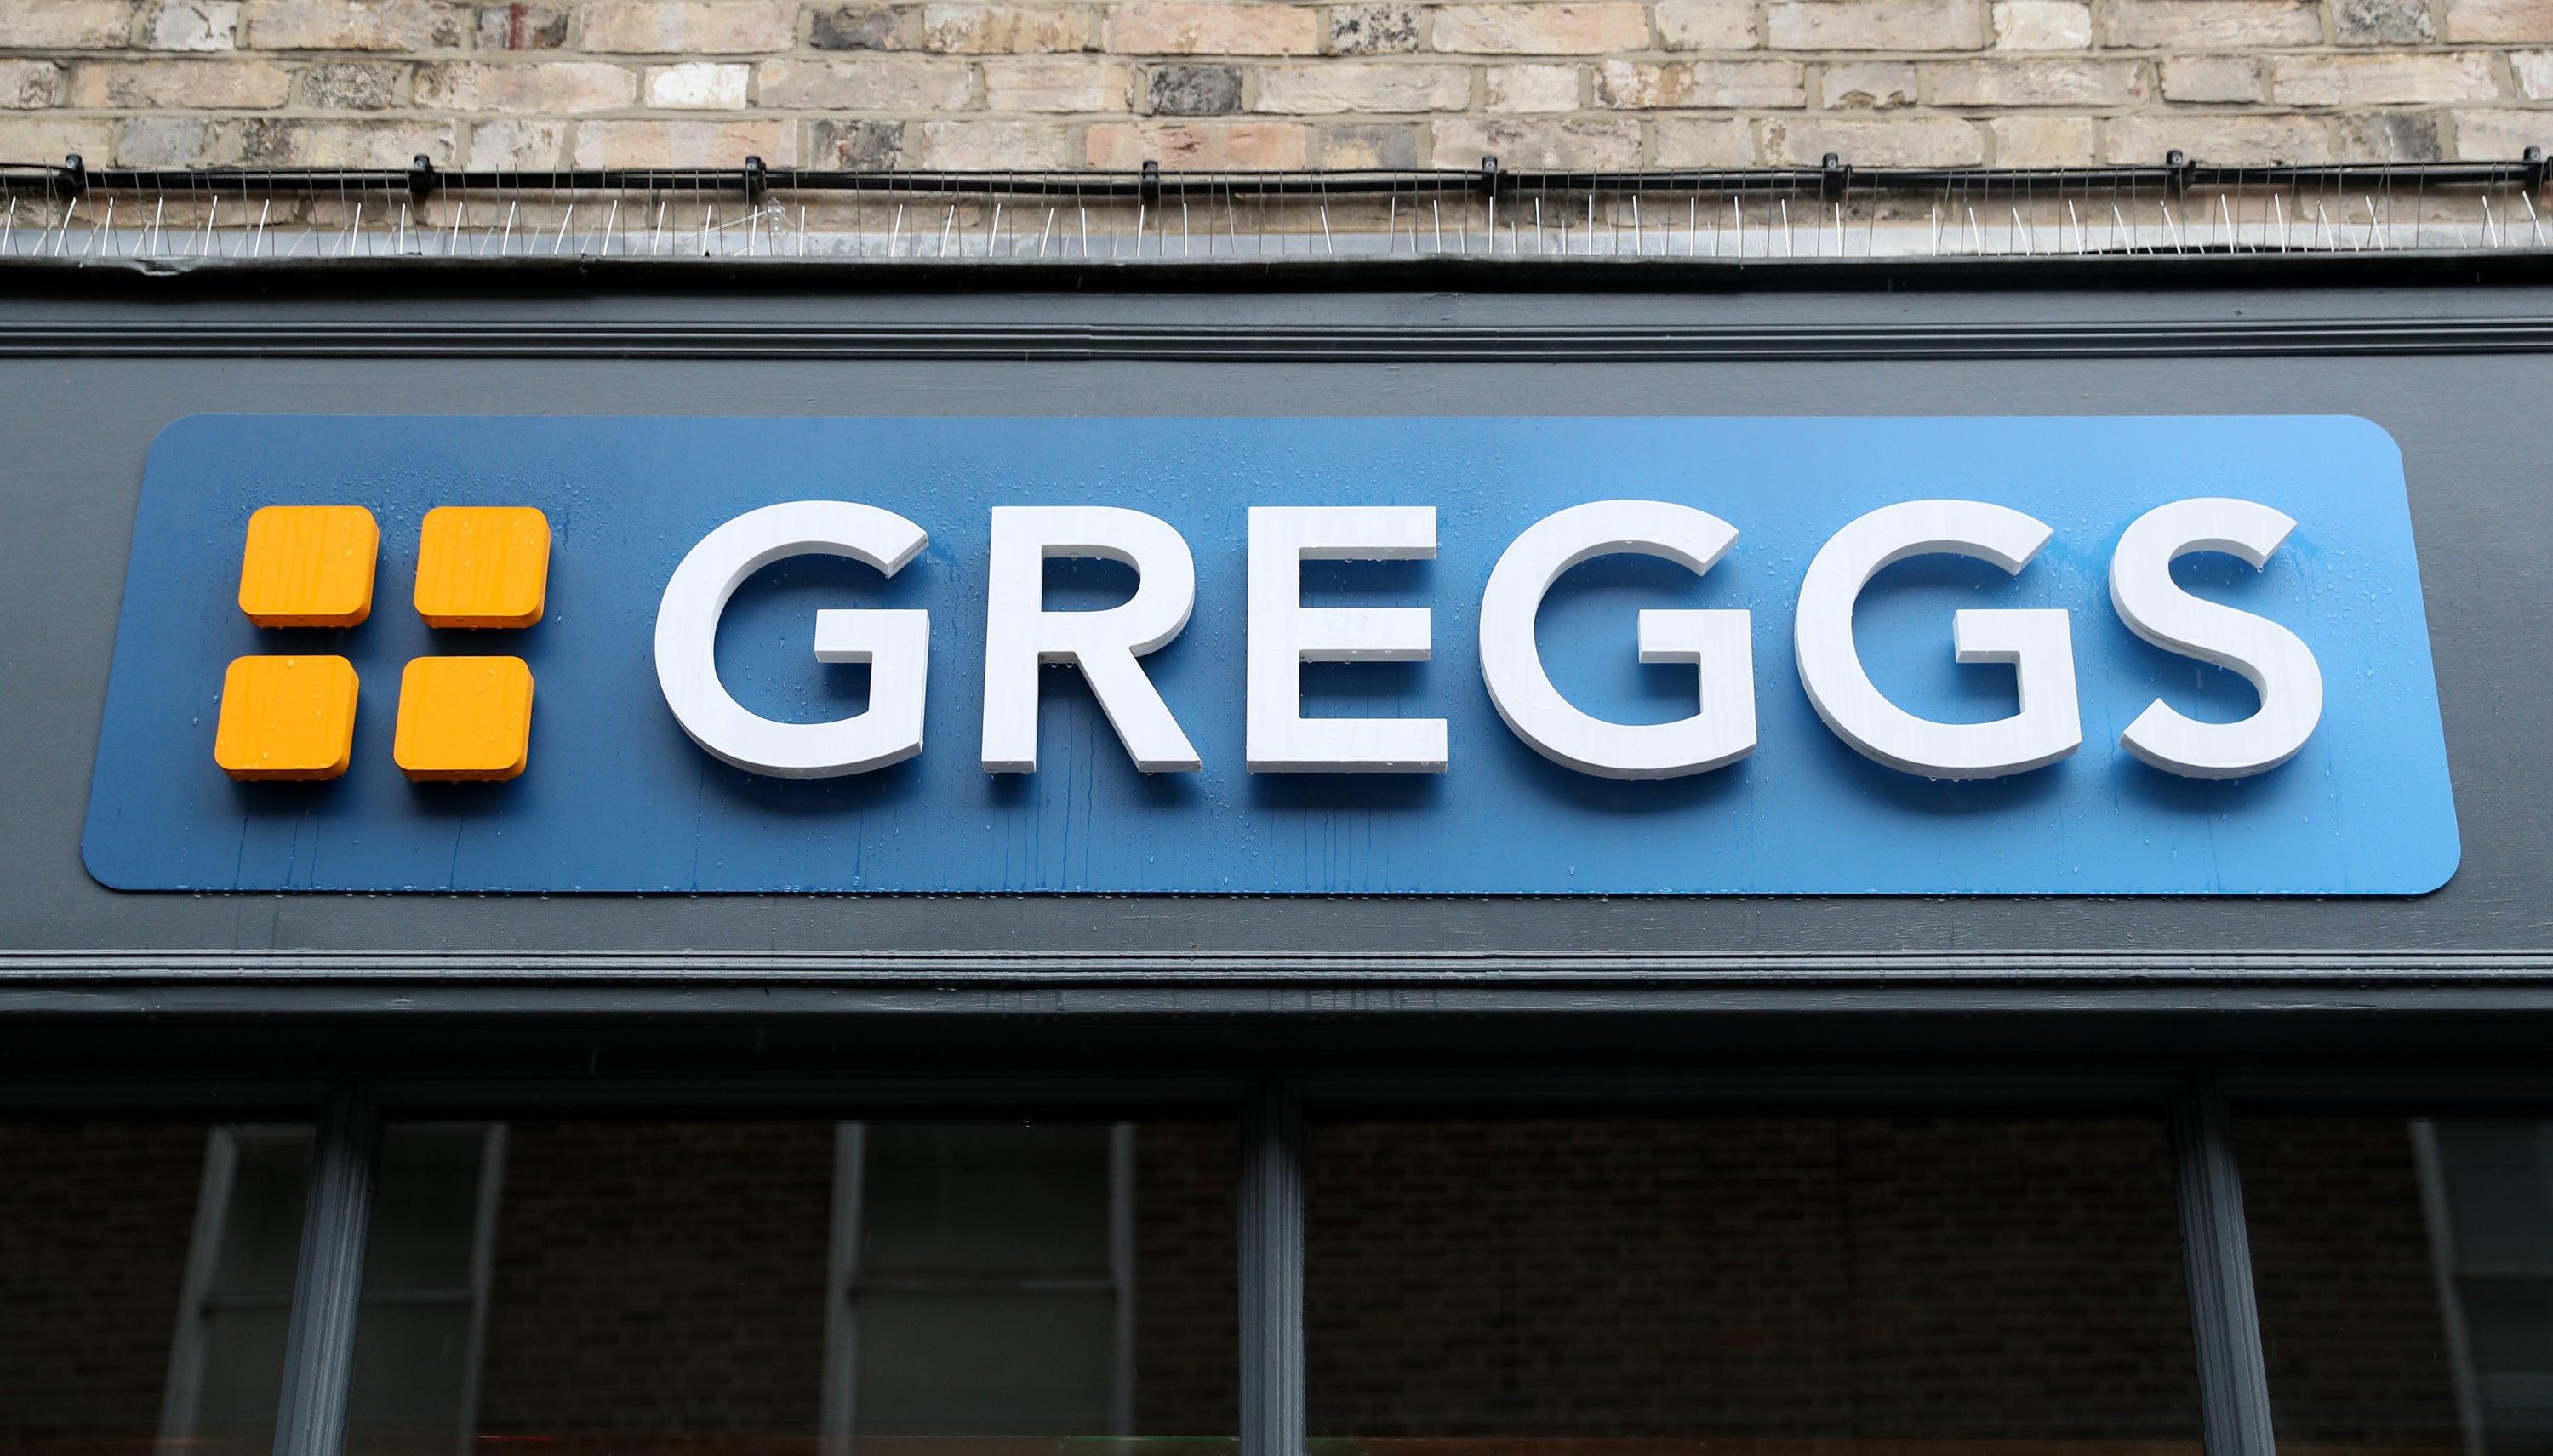 Greggs has its roots in the north, with the first store opened in 1939 in Tyneside